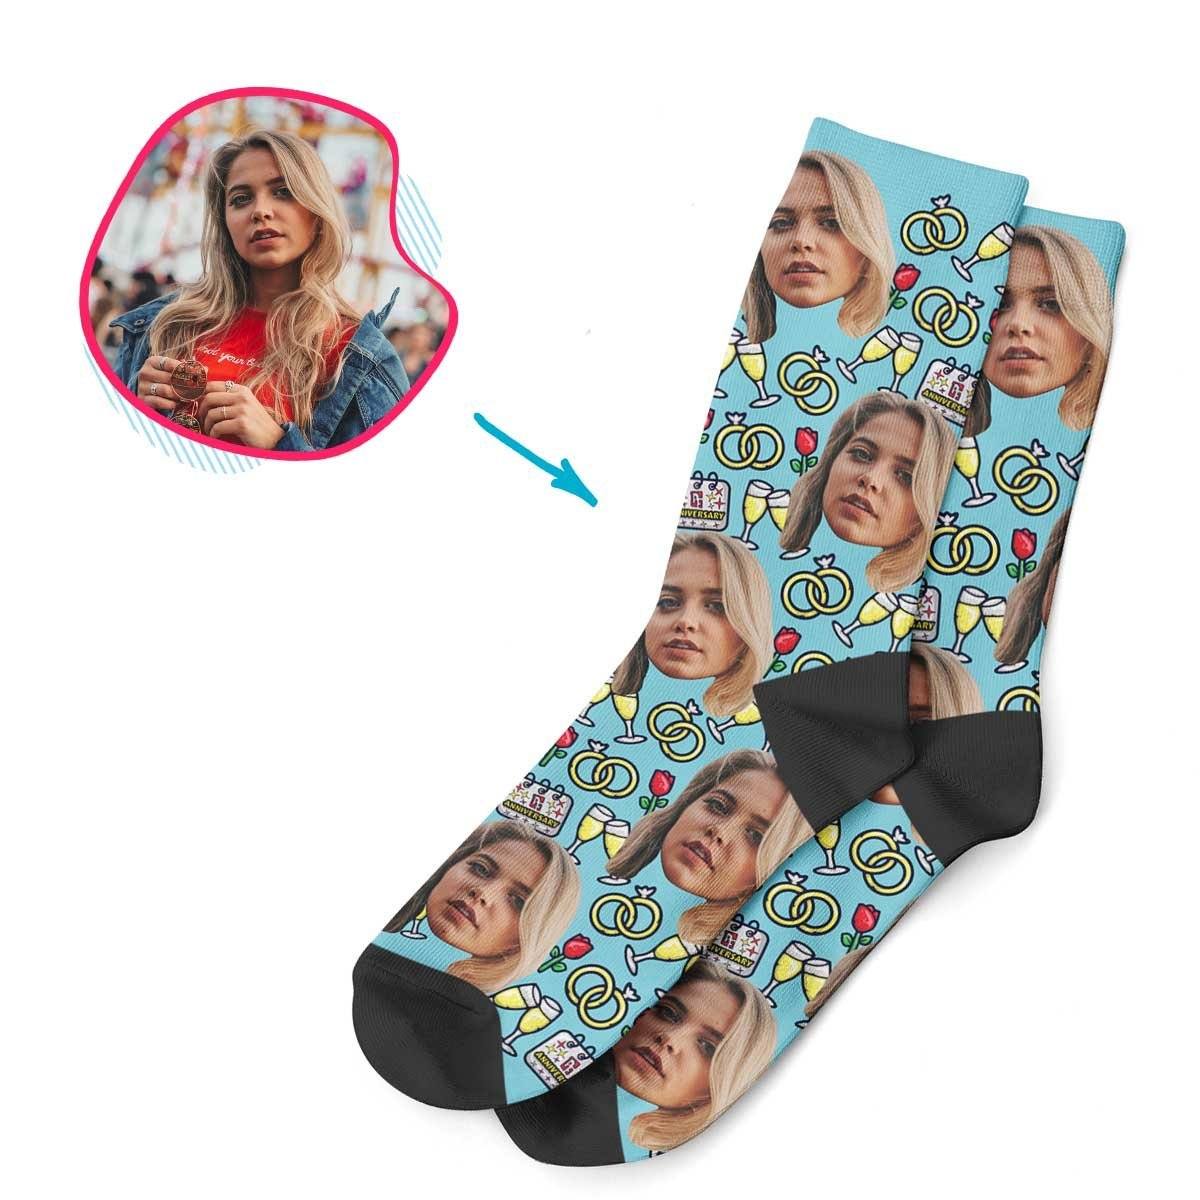 Blue Anniversary personalized socks with photo of face printed on them